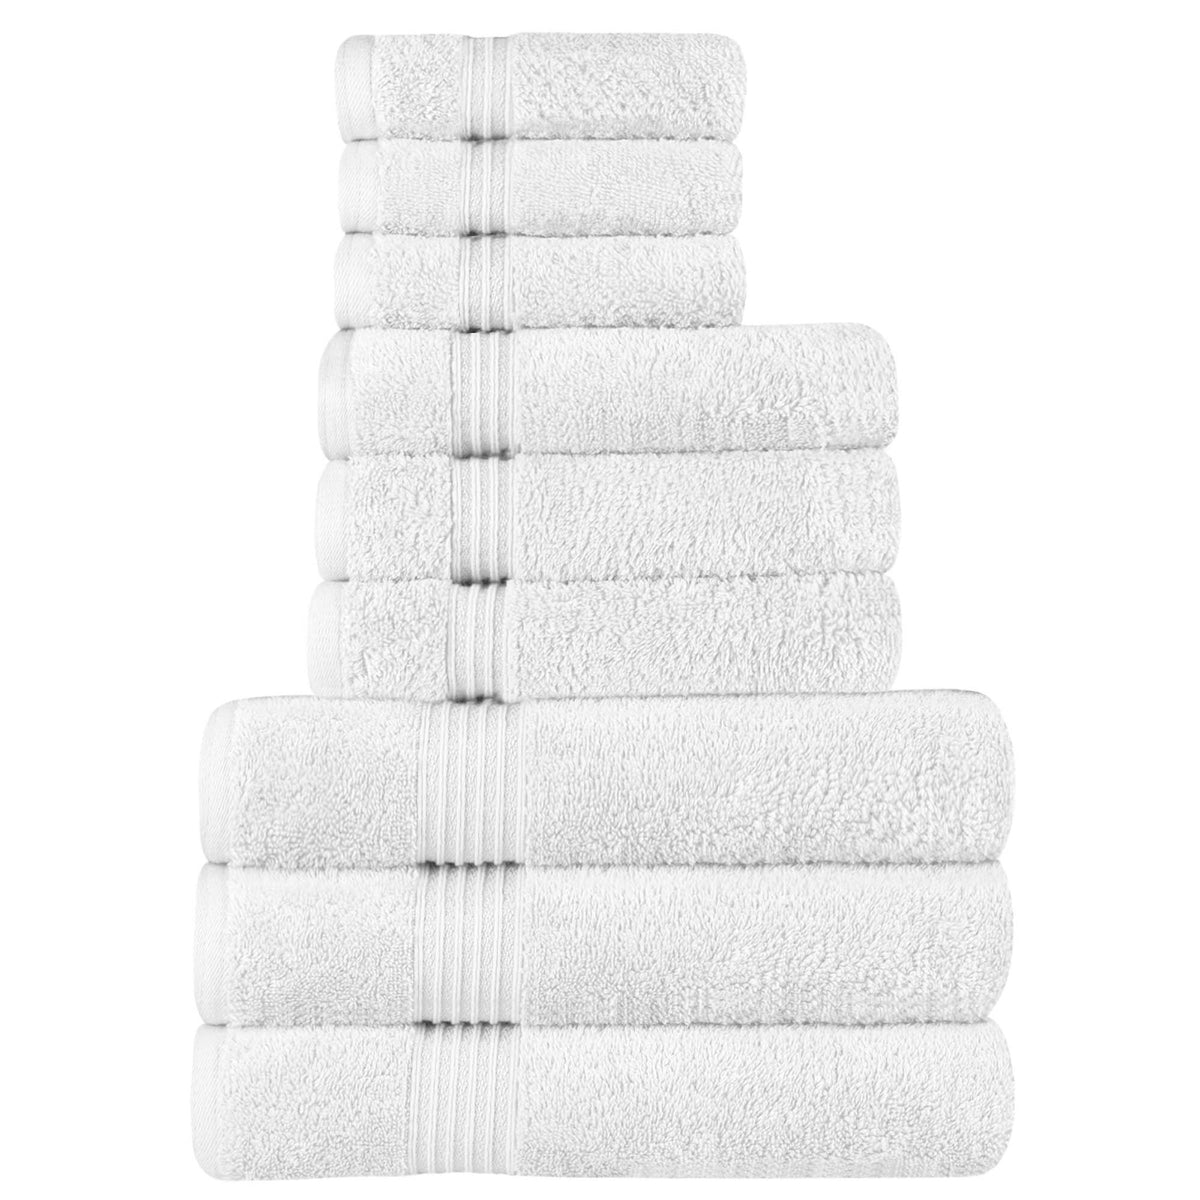 Egyptian Cotton Highly Absorbent Solid 9 Piece Ultra Soft Towel Set - White